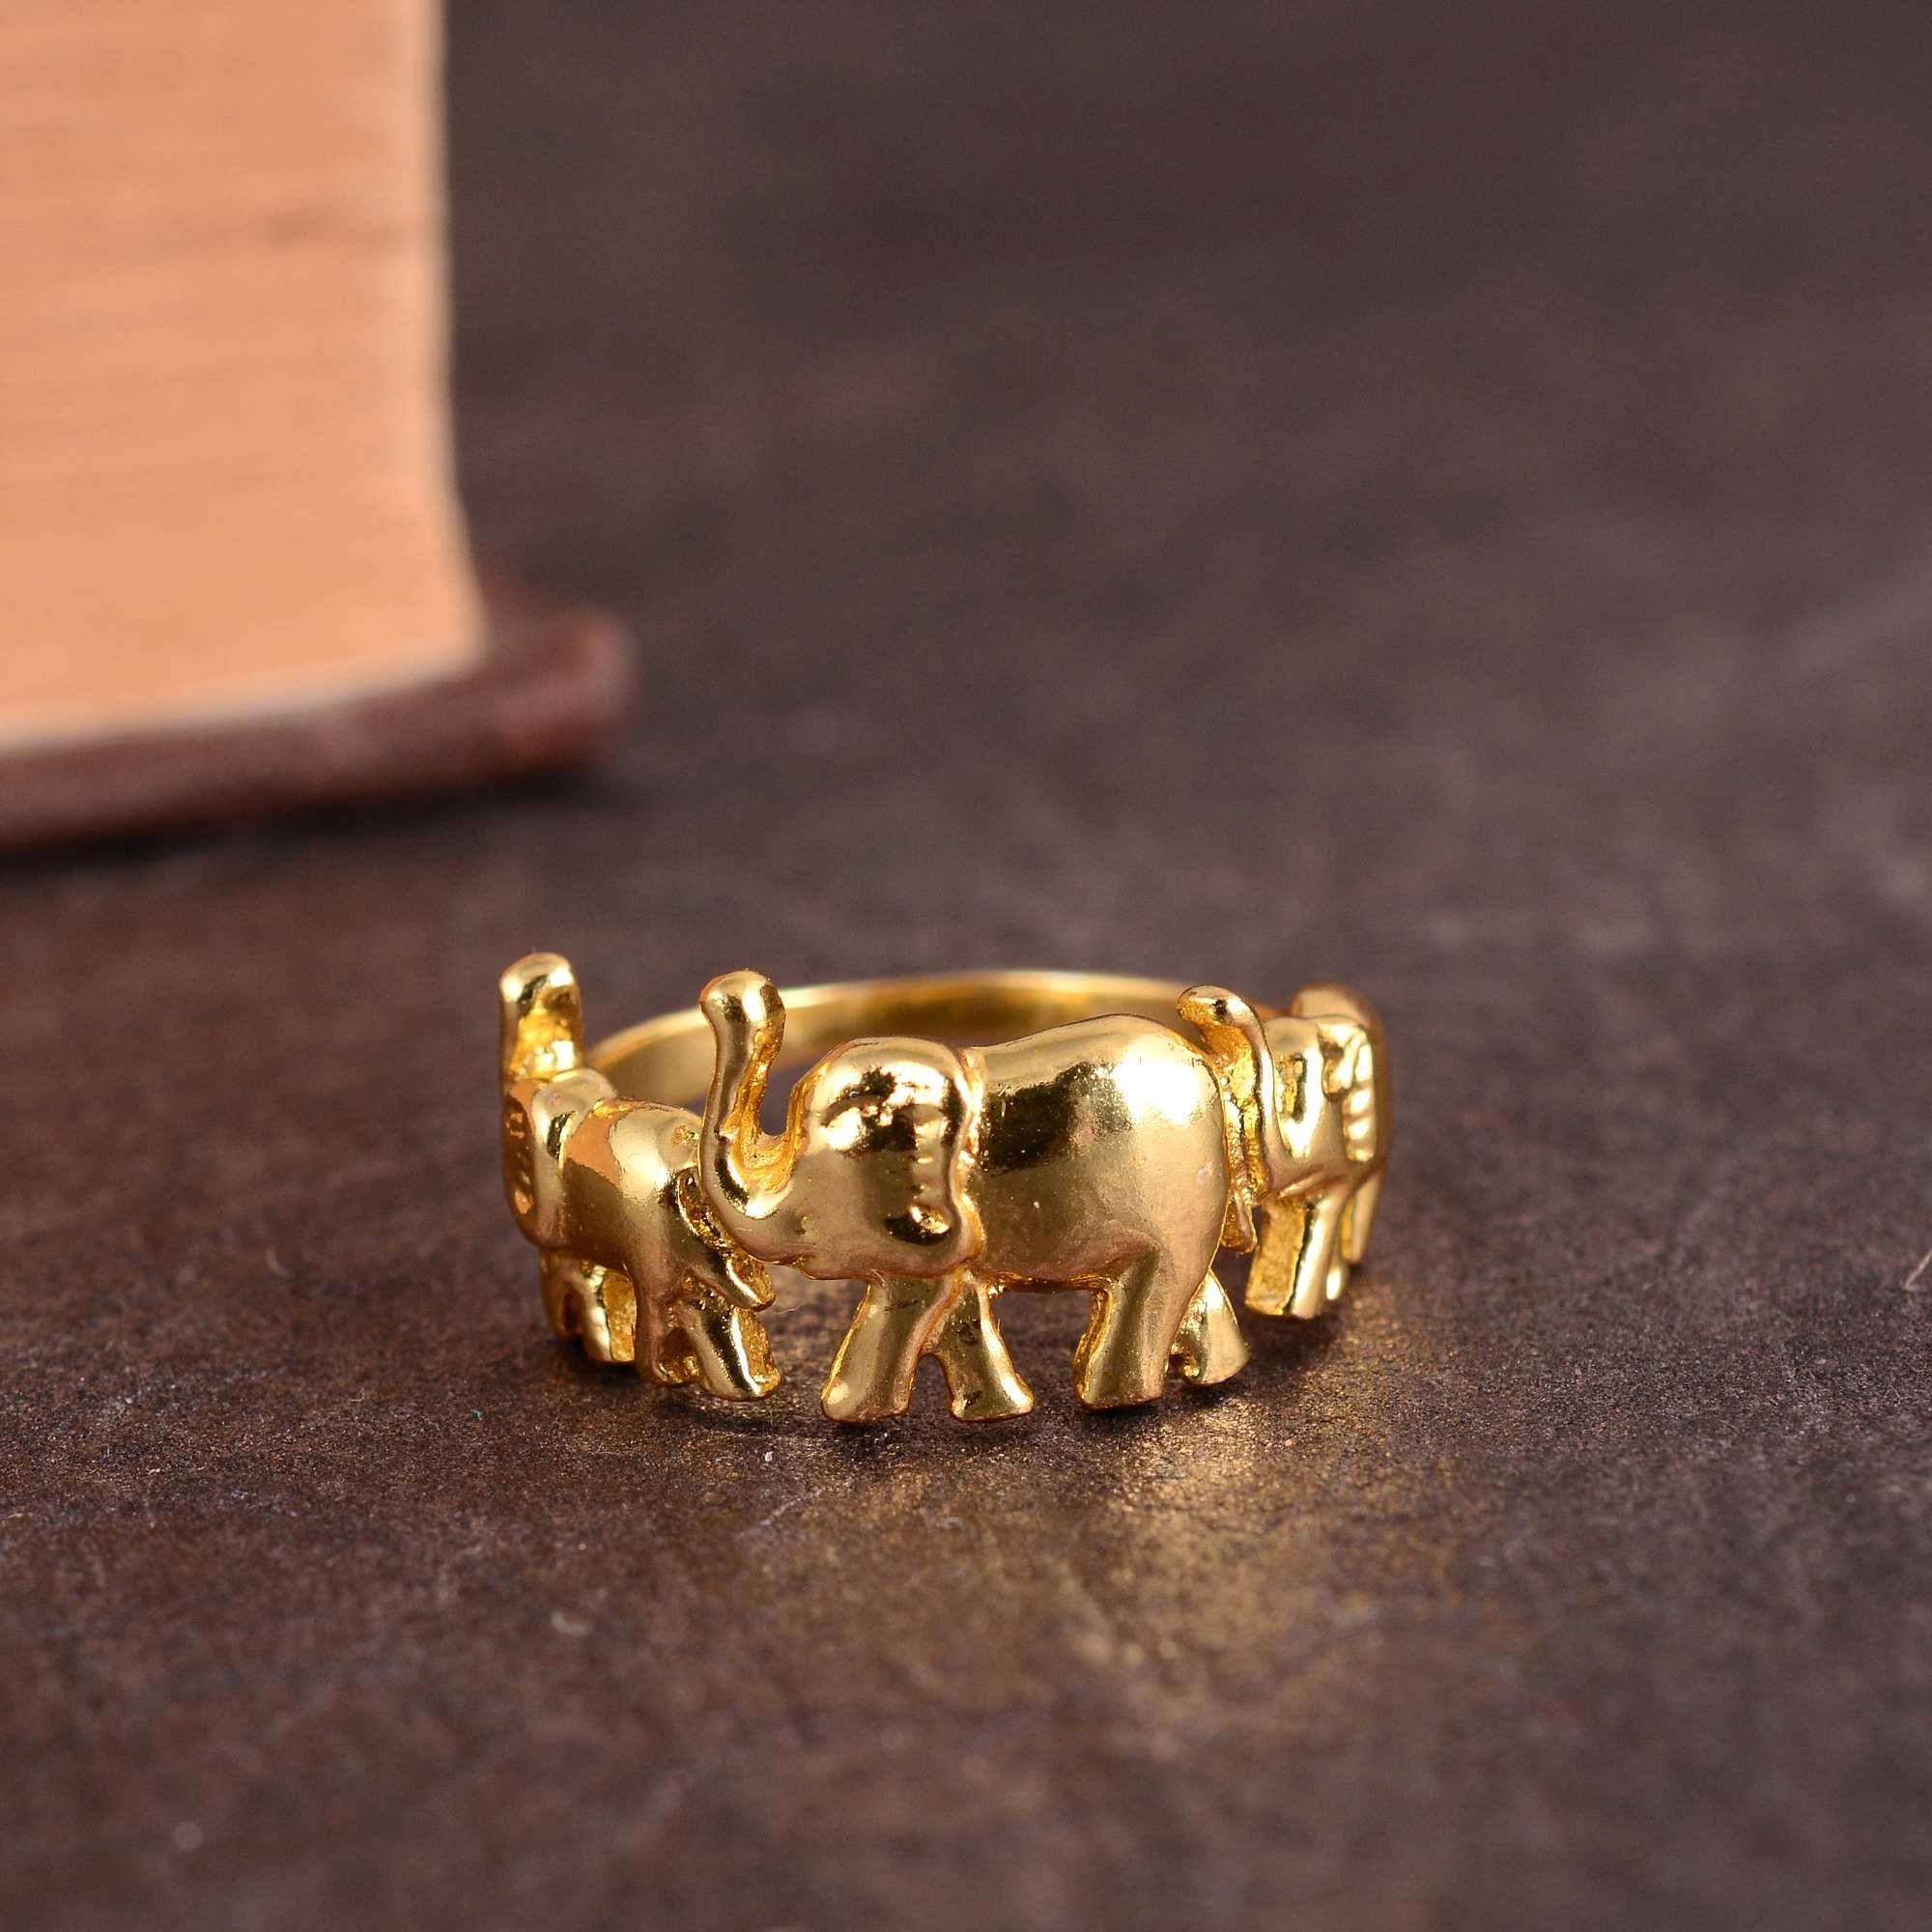 Uloveido Lovely Elephants Ring Yellow Gold Plated Animal Rings for Women  Christmas Gifts for Her RA083 (Gold, Size 8) - Walmart.com